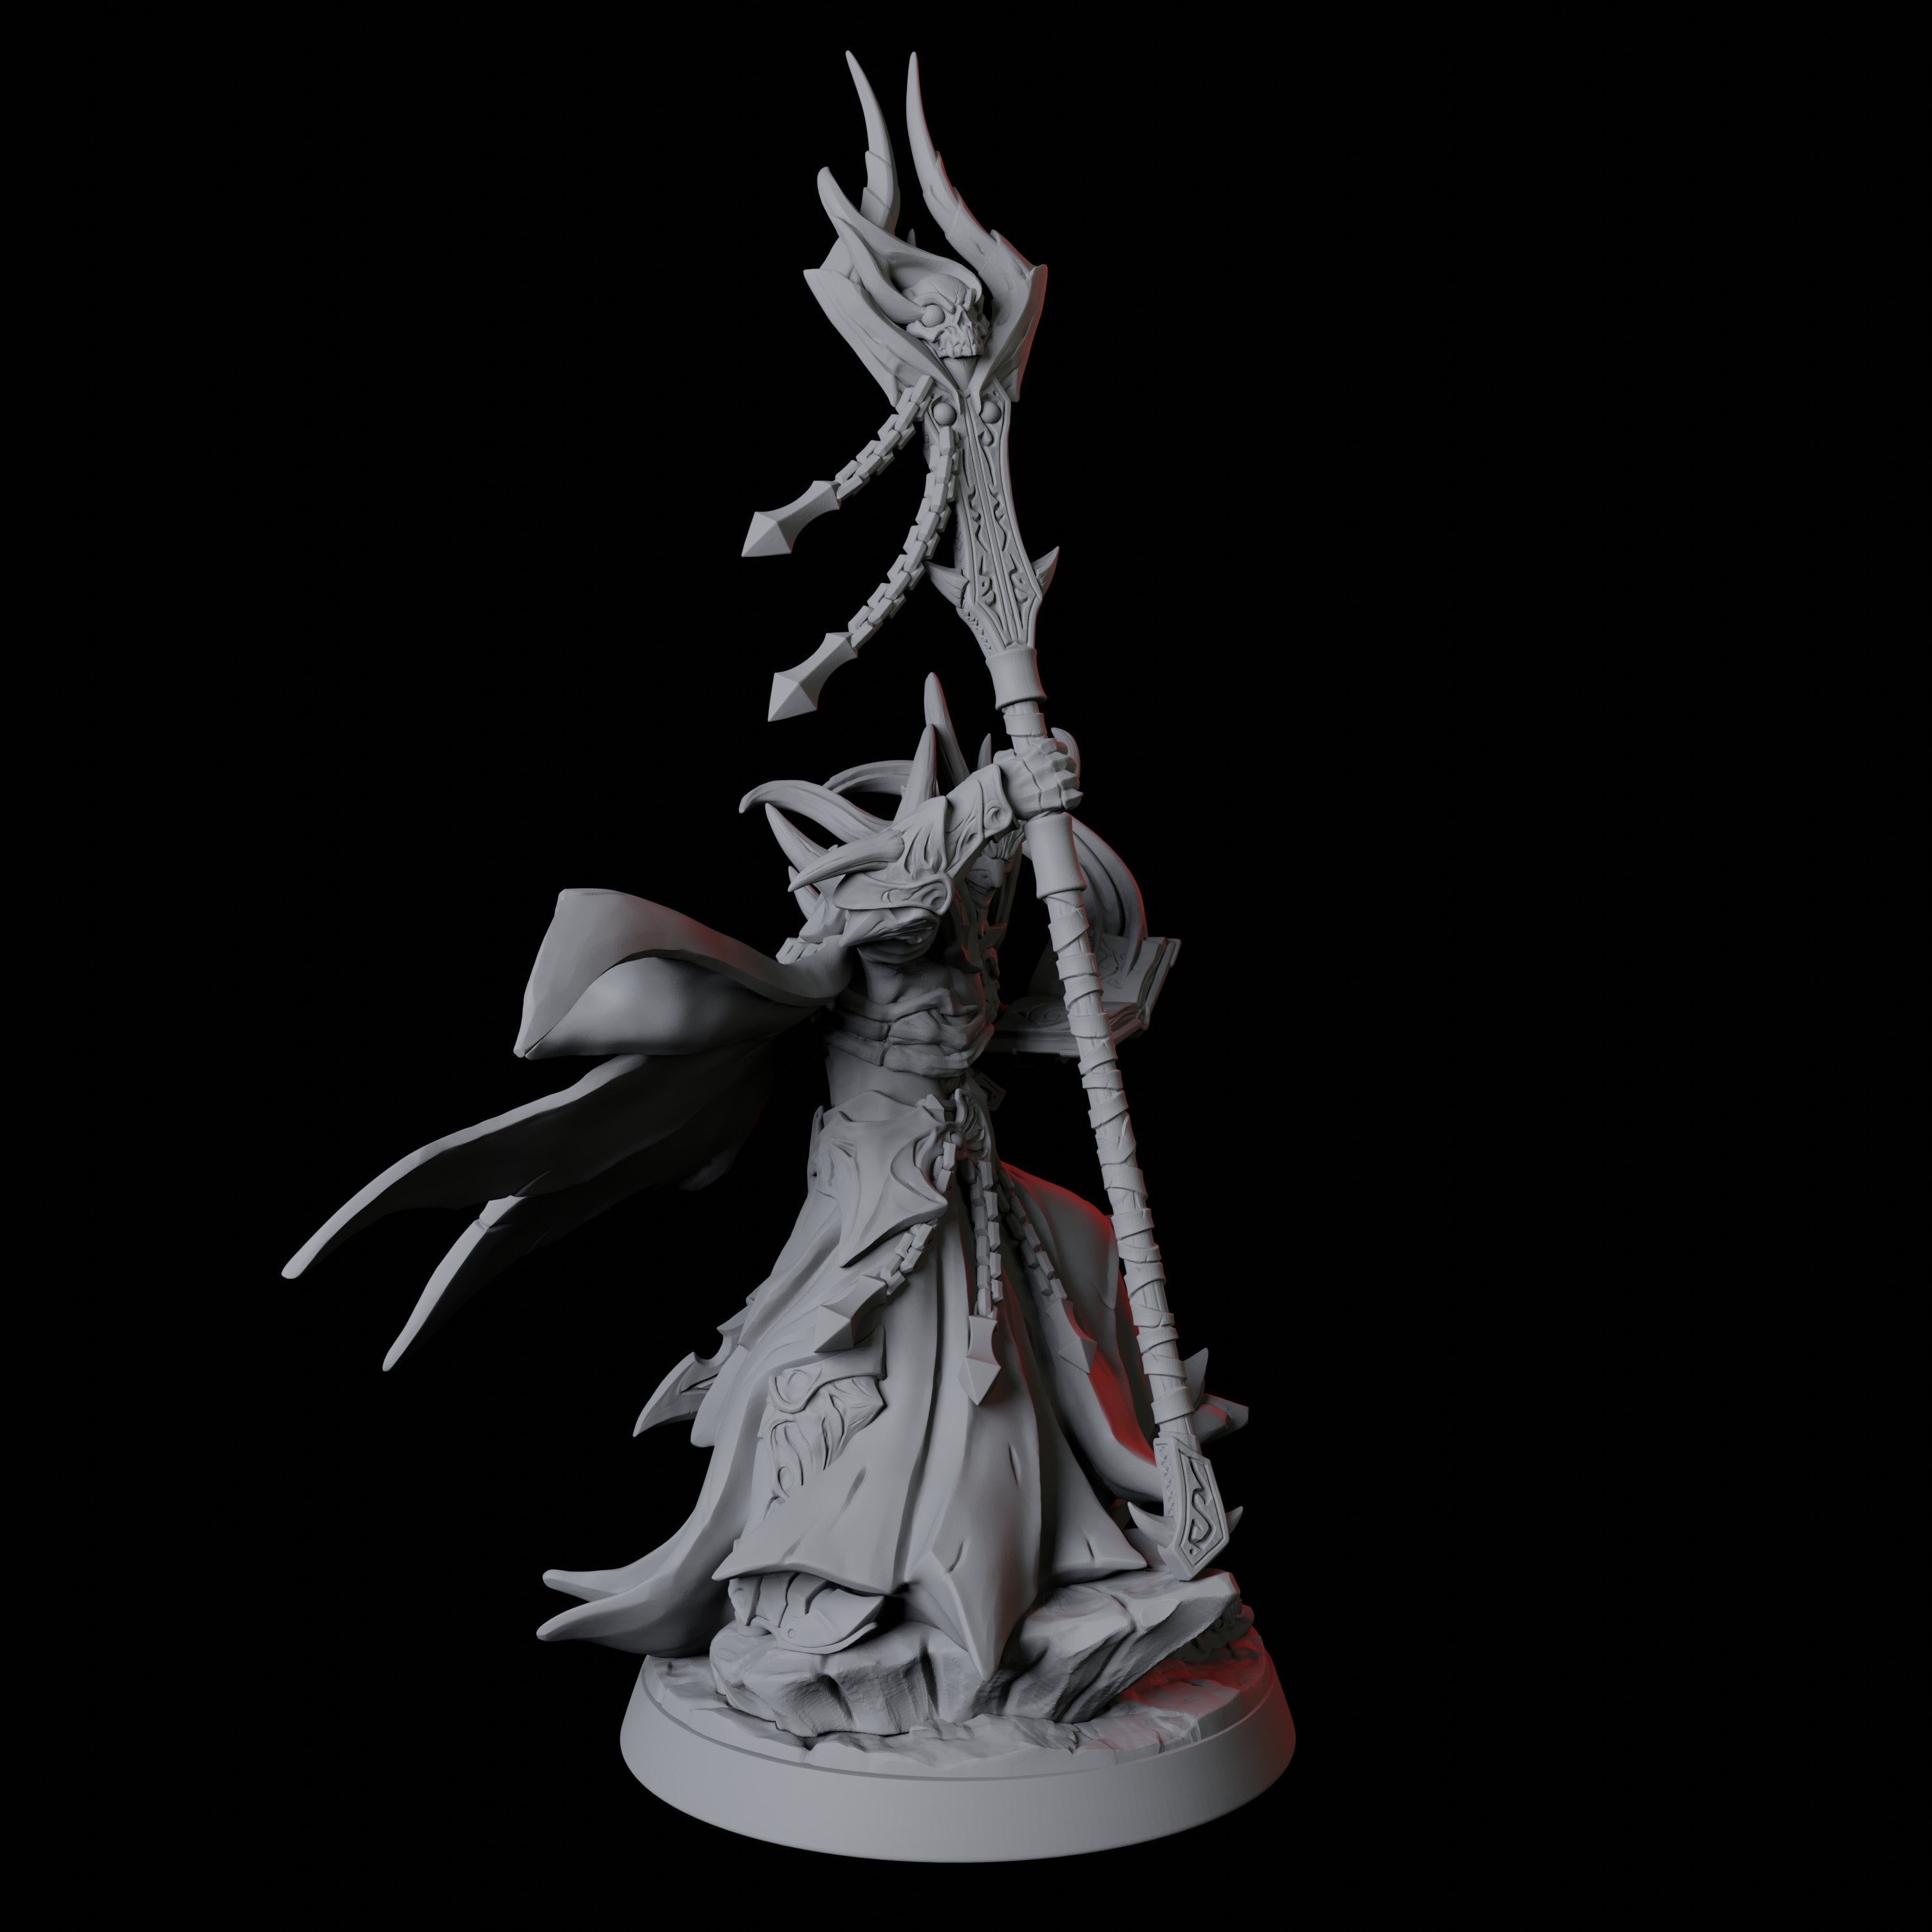 Devil Wizard Miniature for Dungeons and Dragons